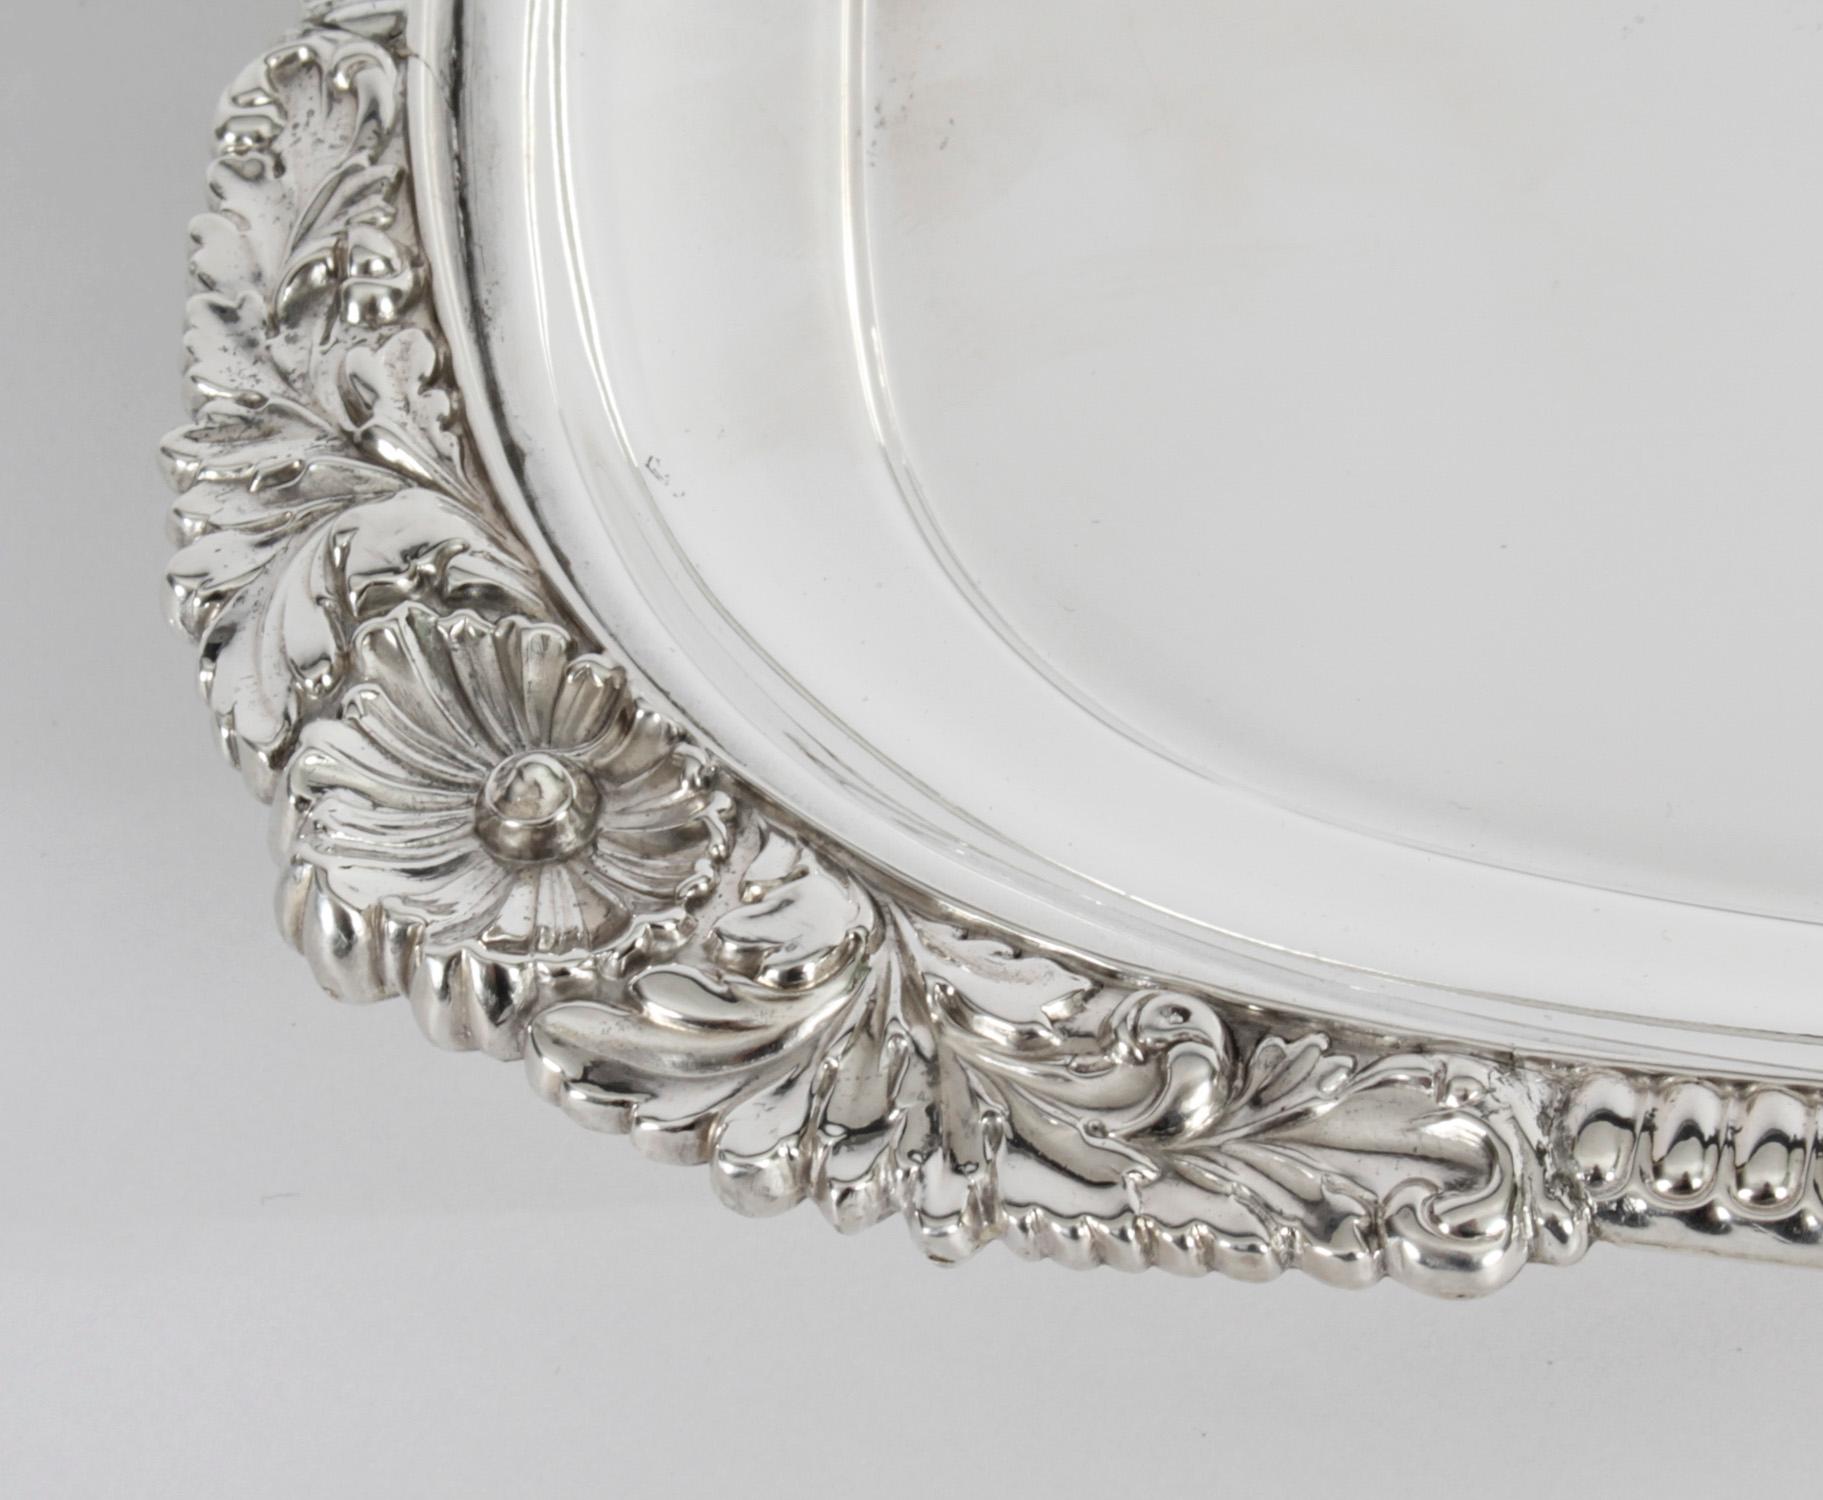 Mid-19th Century Antique English Silver Plated Twin Handled Tray Walker & Hall, 19th Century